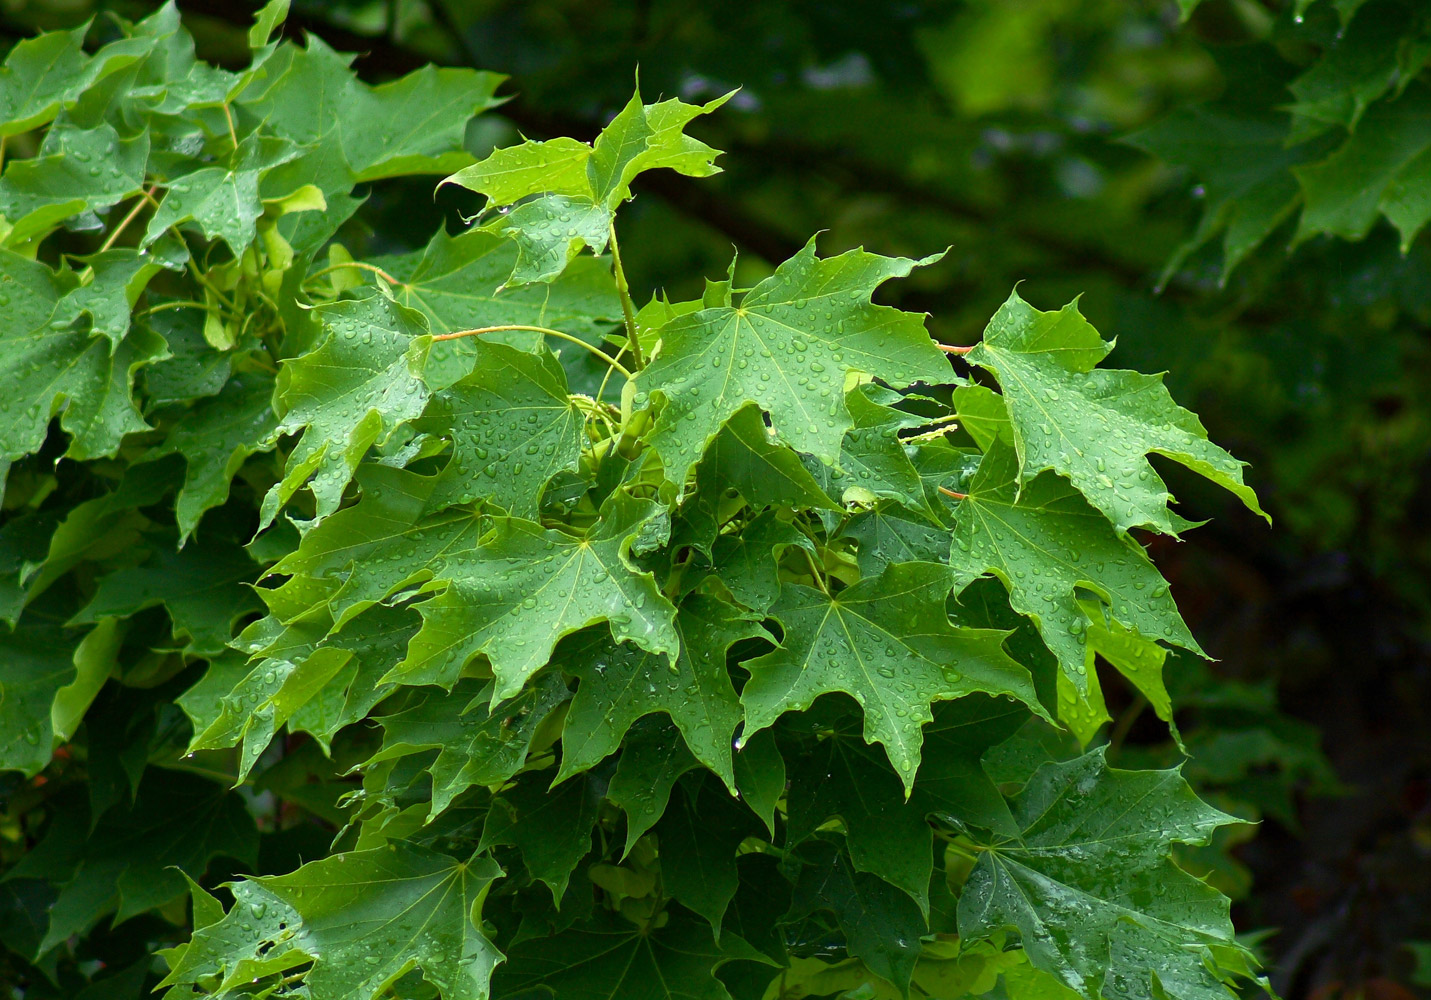 Acer platanoides (Spitzahorn) - © By Martin Bobka (= Martin120) - Own work, CC BY-SA 2.5, https://commons.wikimedia.org/w/index.php?curid=810277